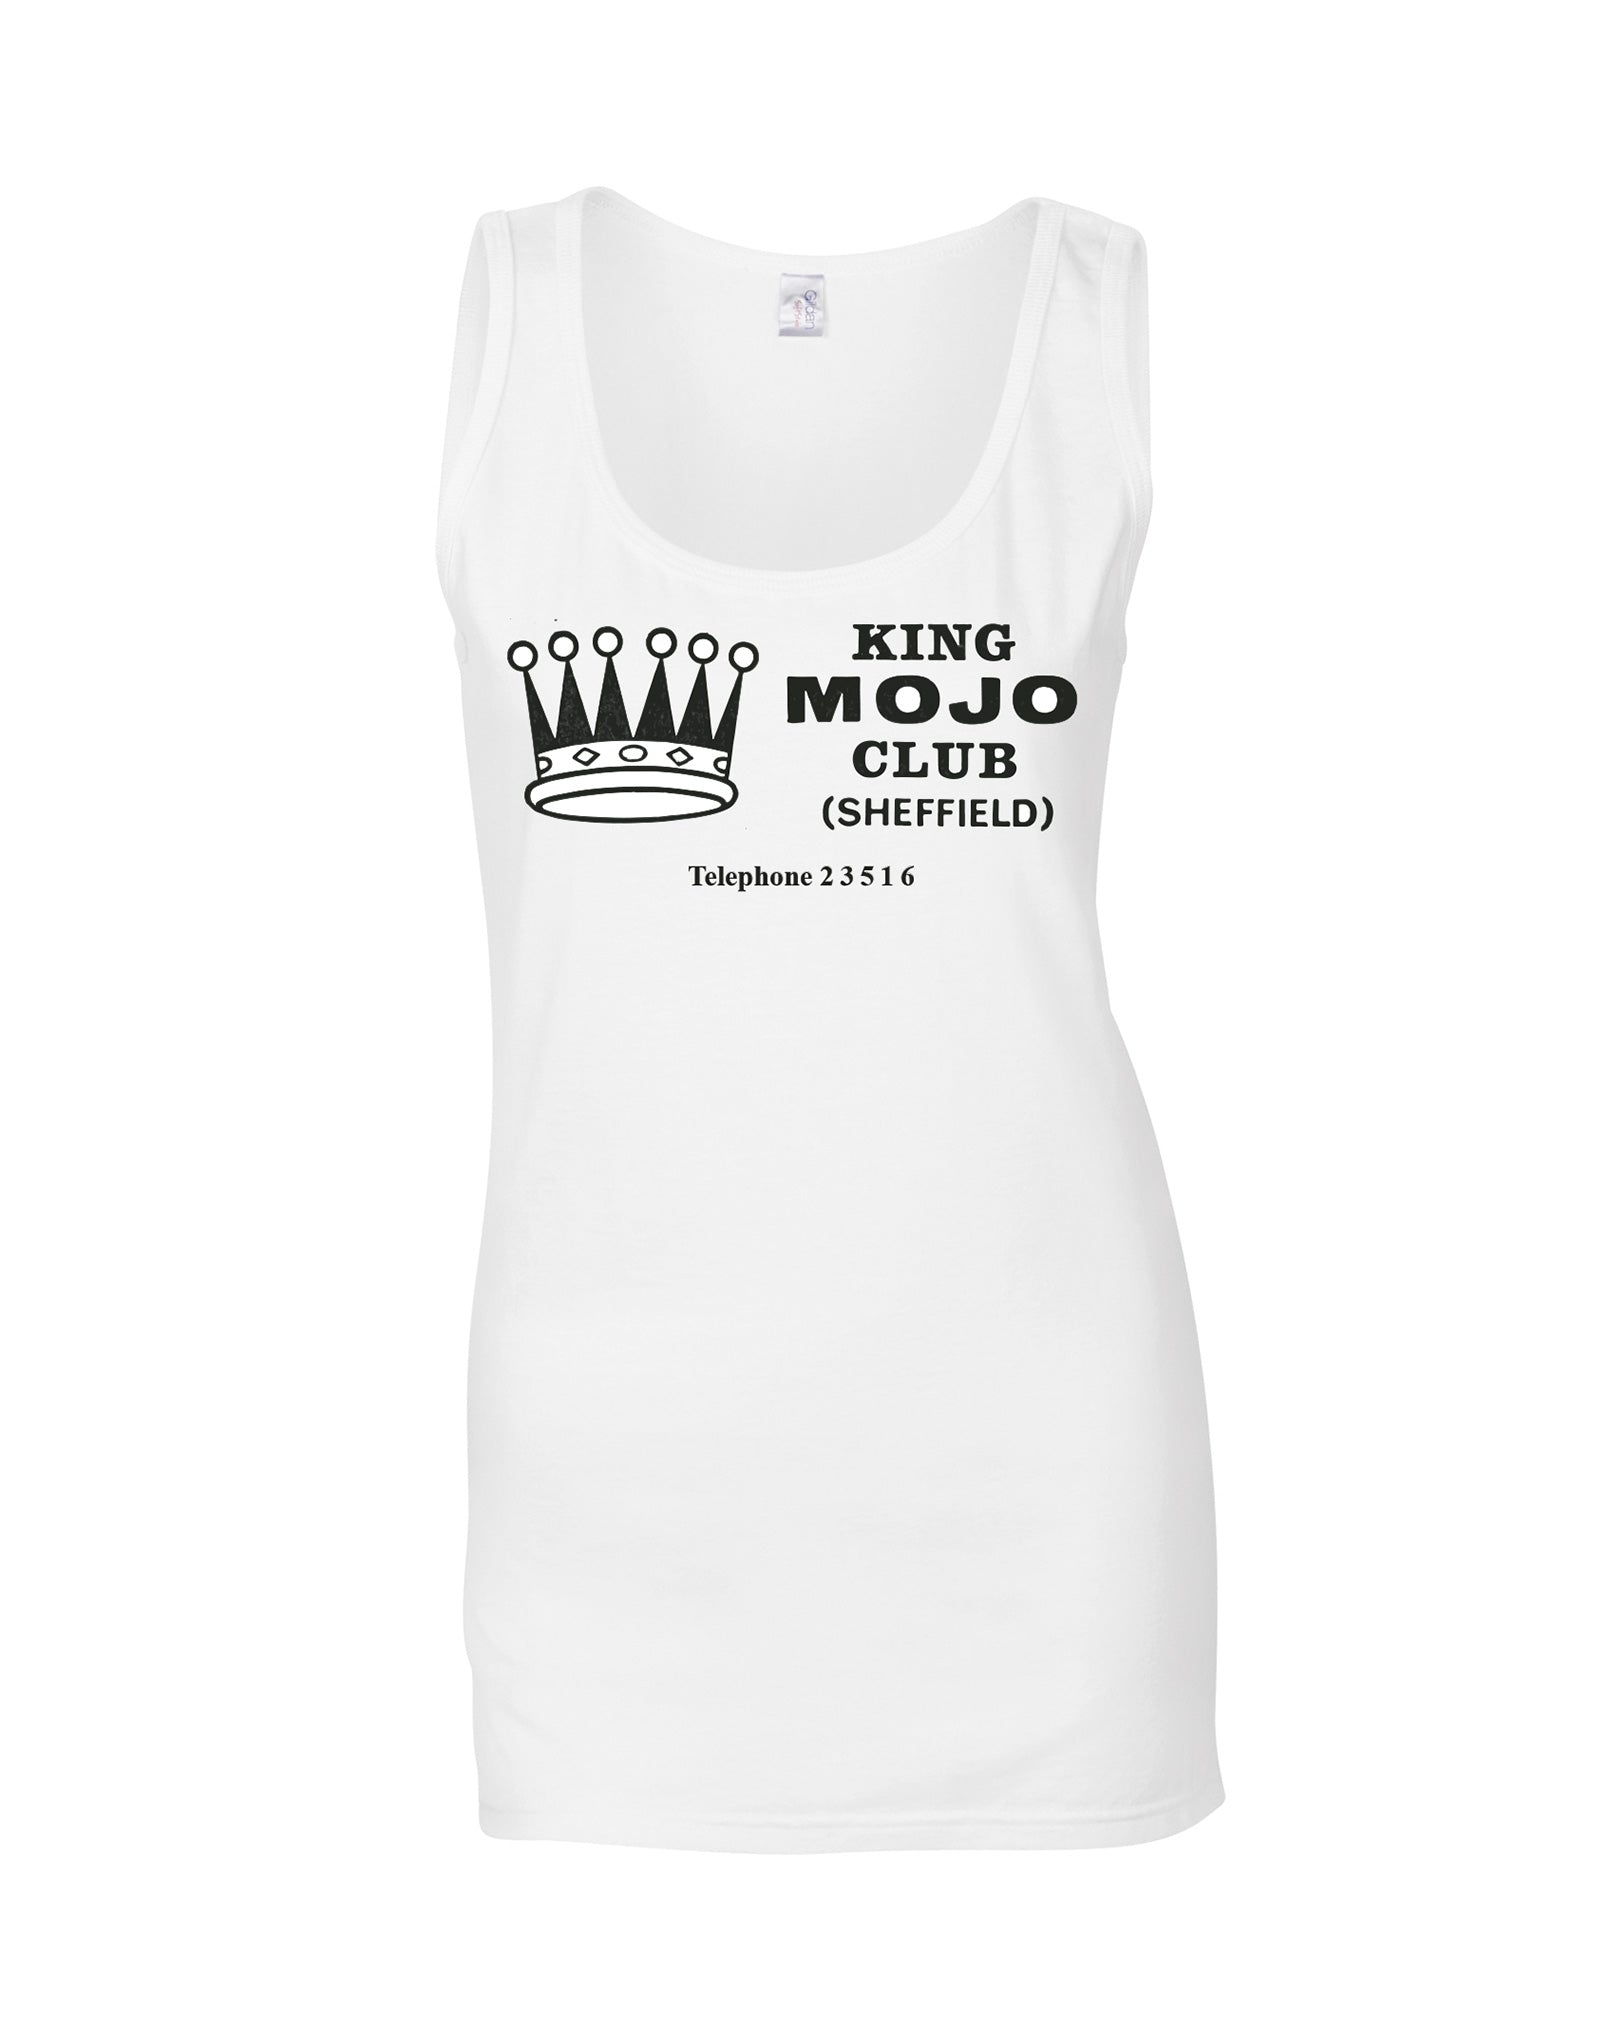 King Mojo ladies fit vest - various colours - Dirty Stop Outs